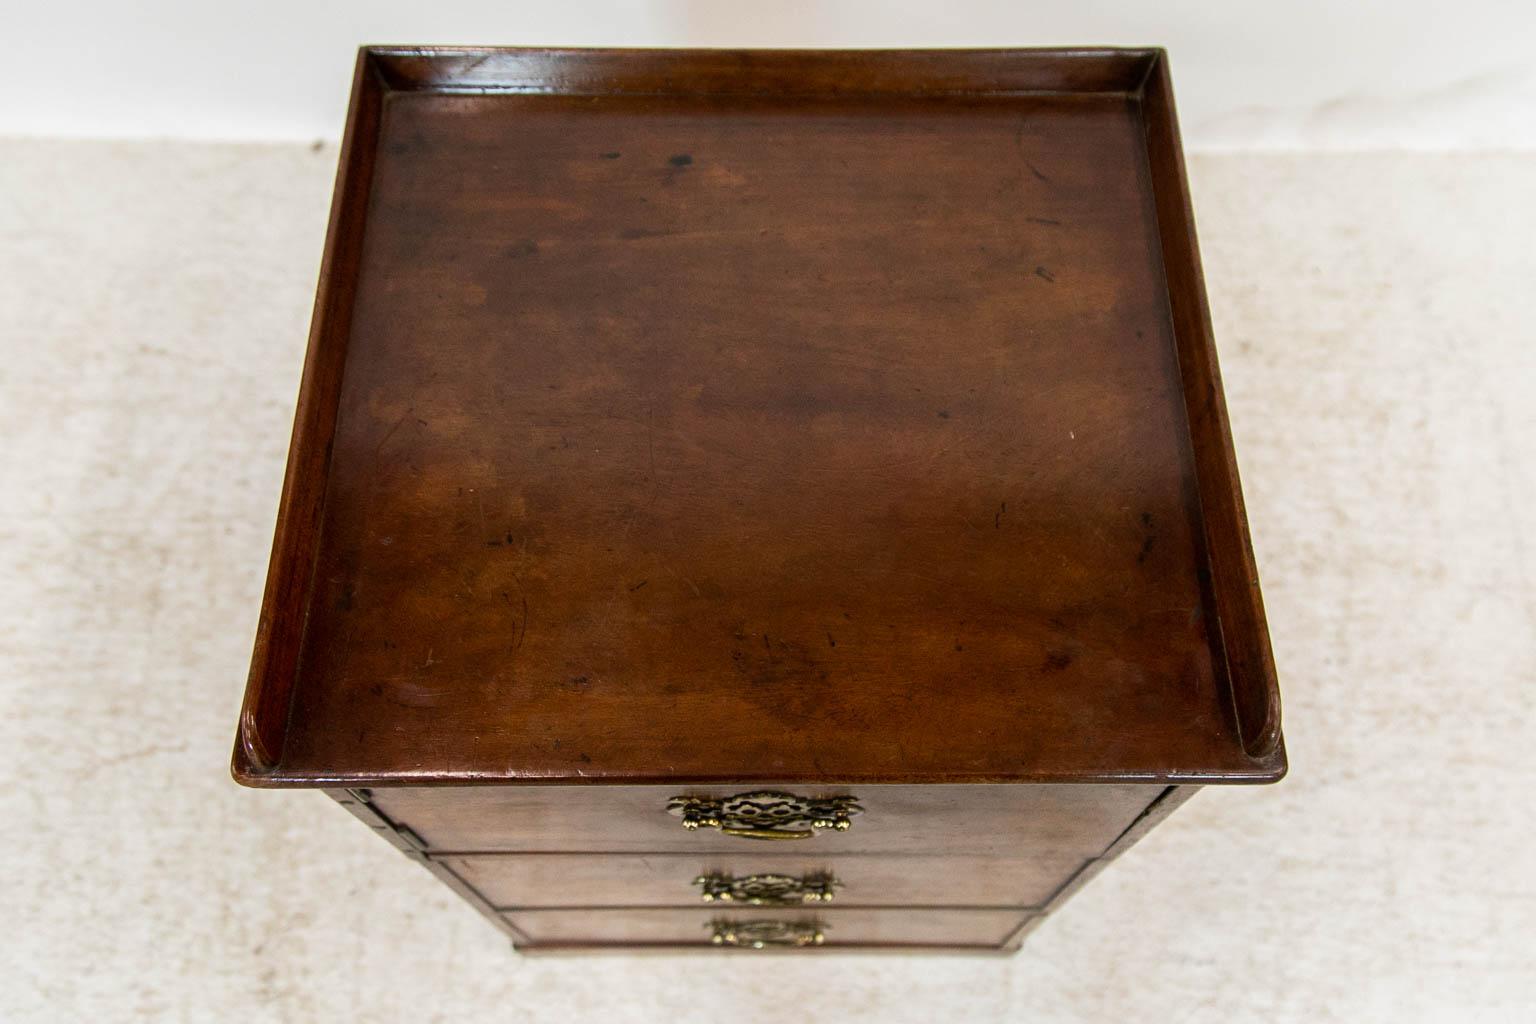 He upper most compartment of this small chest/cabinet has a door that opens to expose the interior. The lower two are working drawers. The top has a gallery on three sides. The hardware is later. This piece could have been converted possibly from a